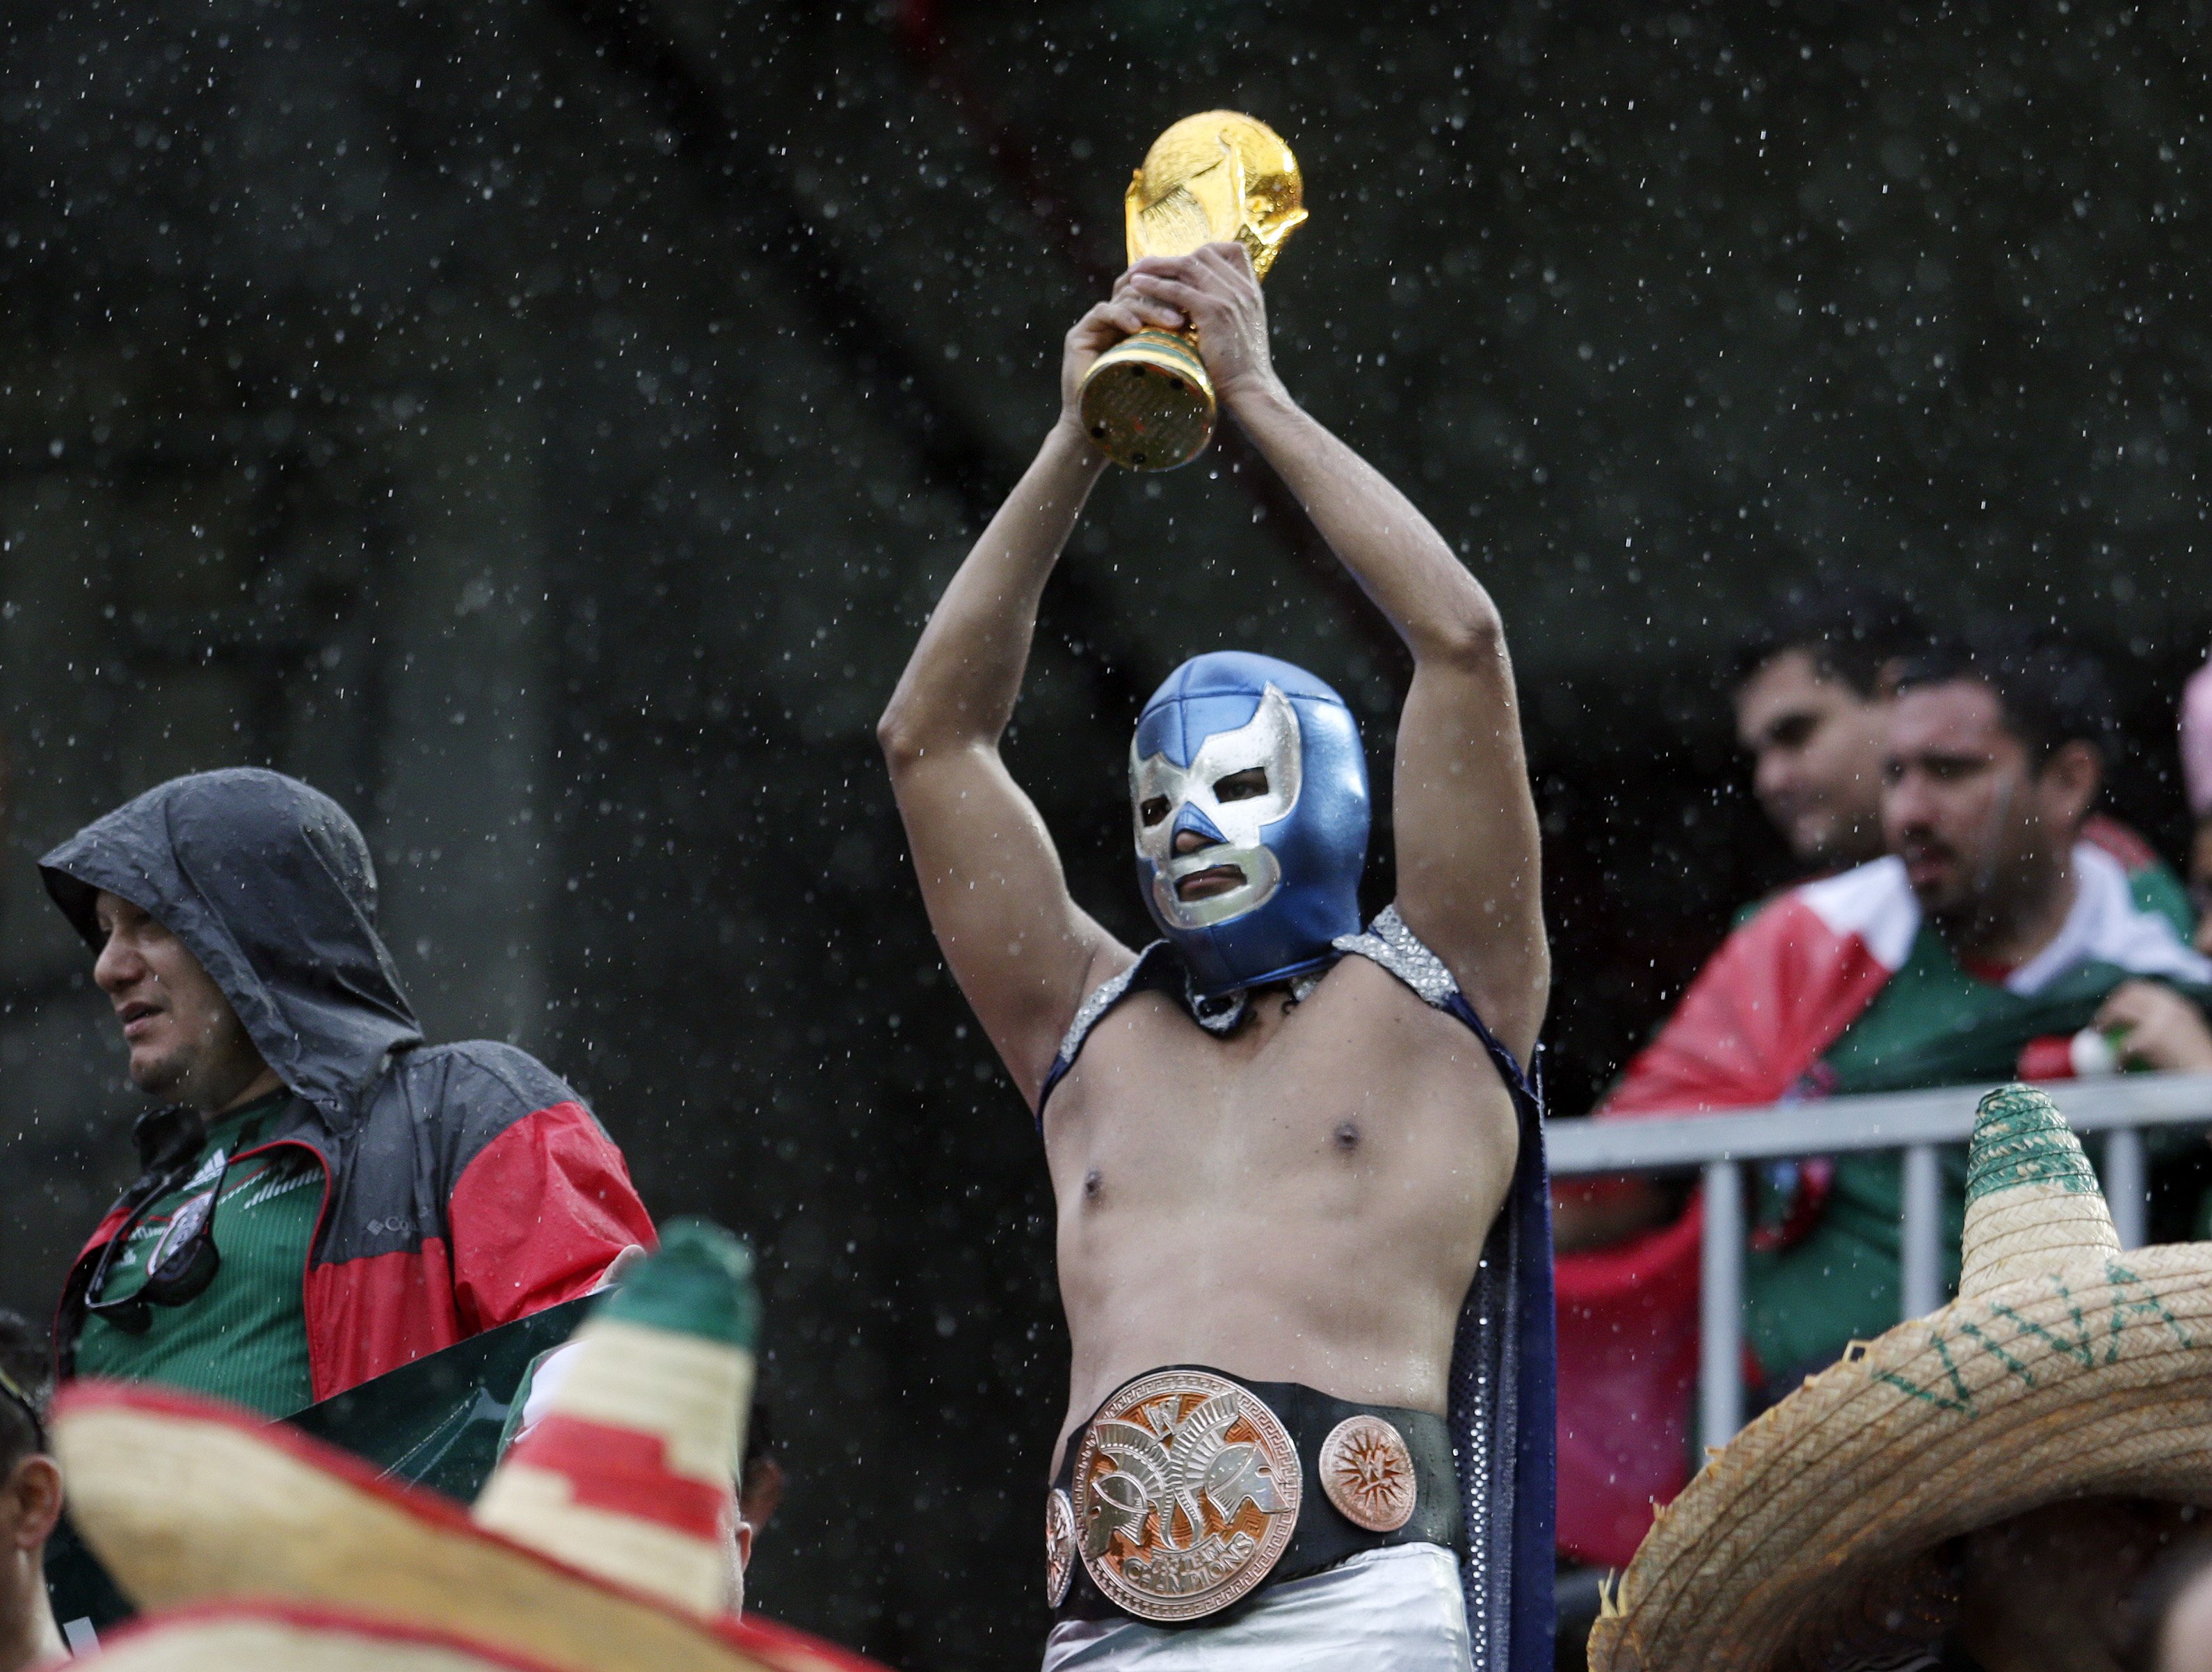 A Mexican fan holds up a replica of the World Cup trophy before the group A World Cup soccer match between Mexico and Cameroon in the Arena das Dunas in Natal, Brazil on Friday, June 13, 2014.